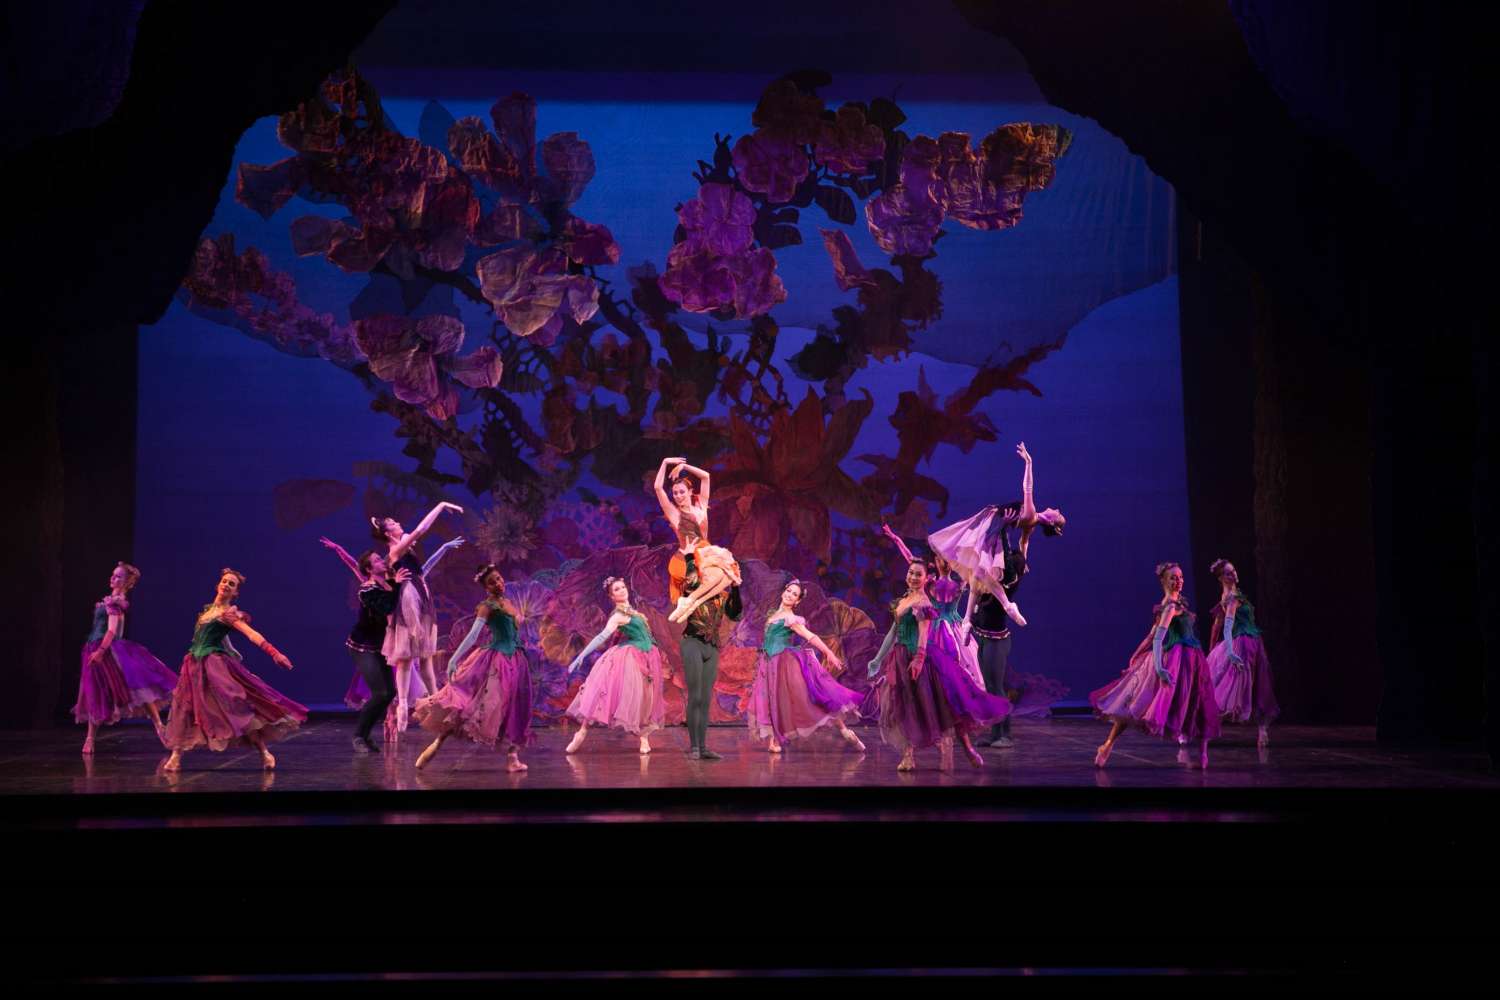 Pittsburgh Ballet Theatre’s recent production of Alice in Wonderland